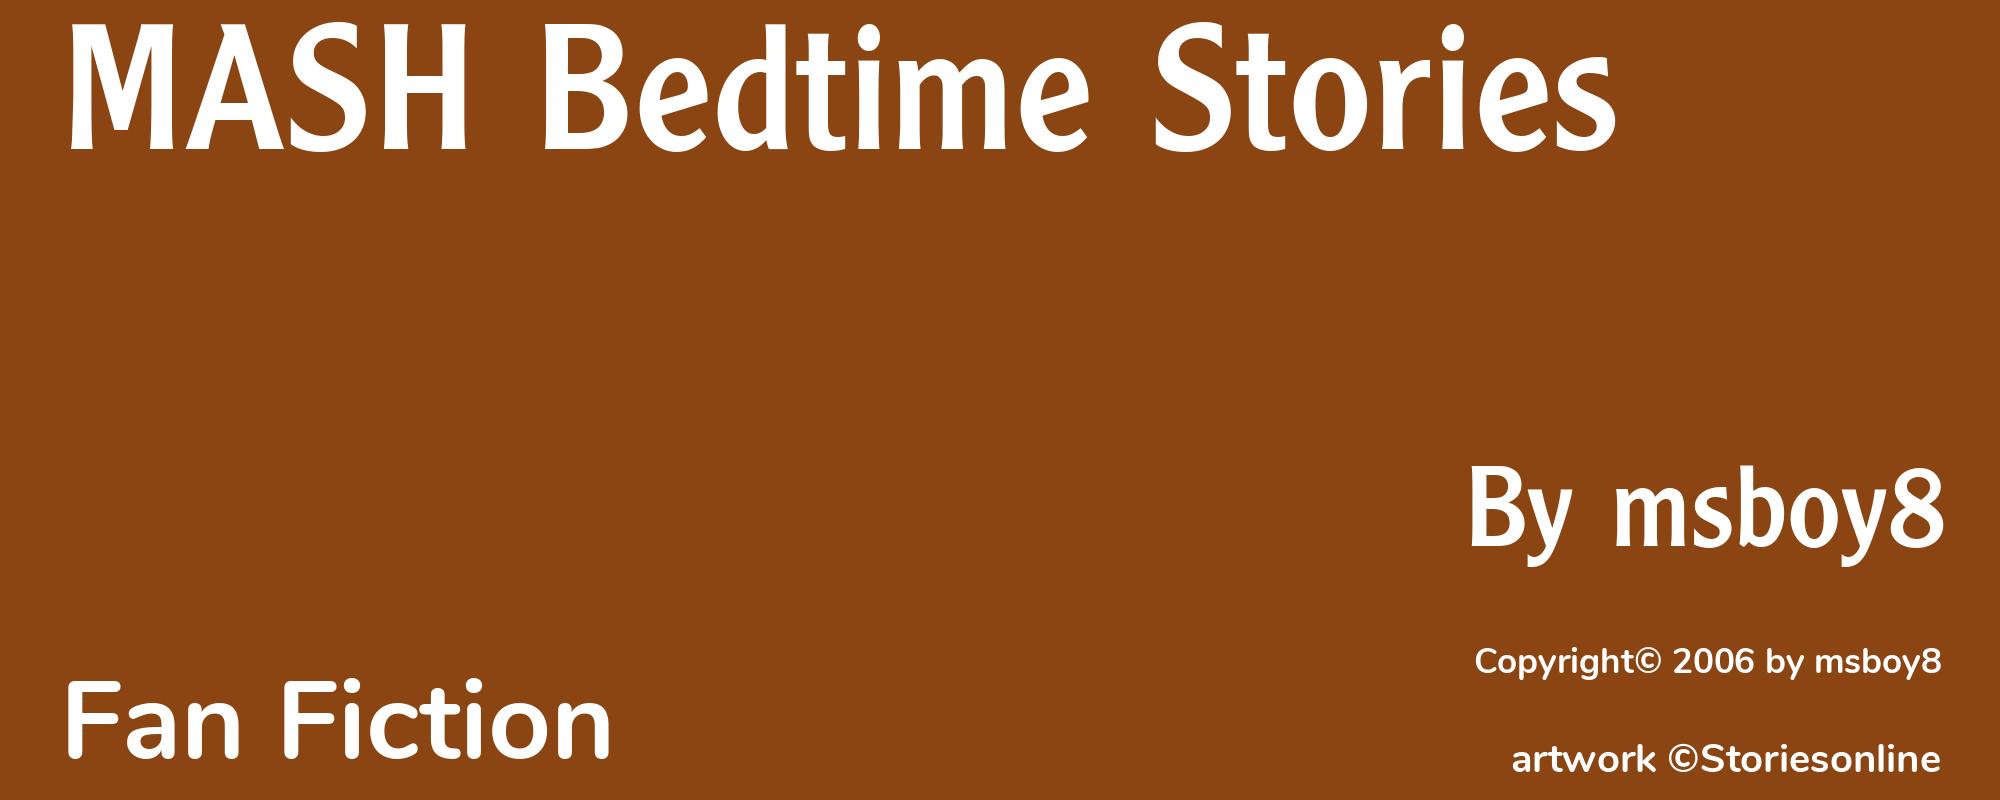 MASH Bedtime Stories - Cover